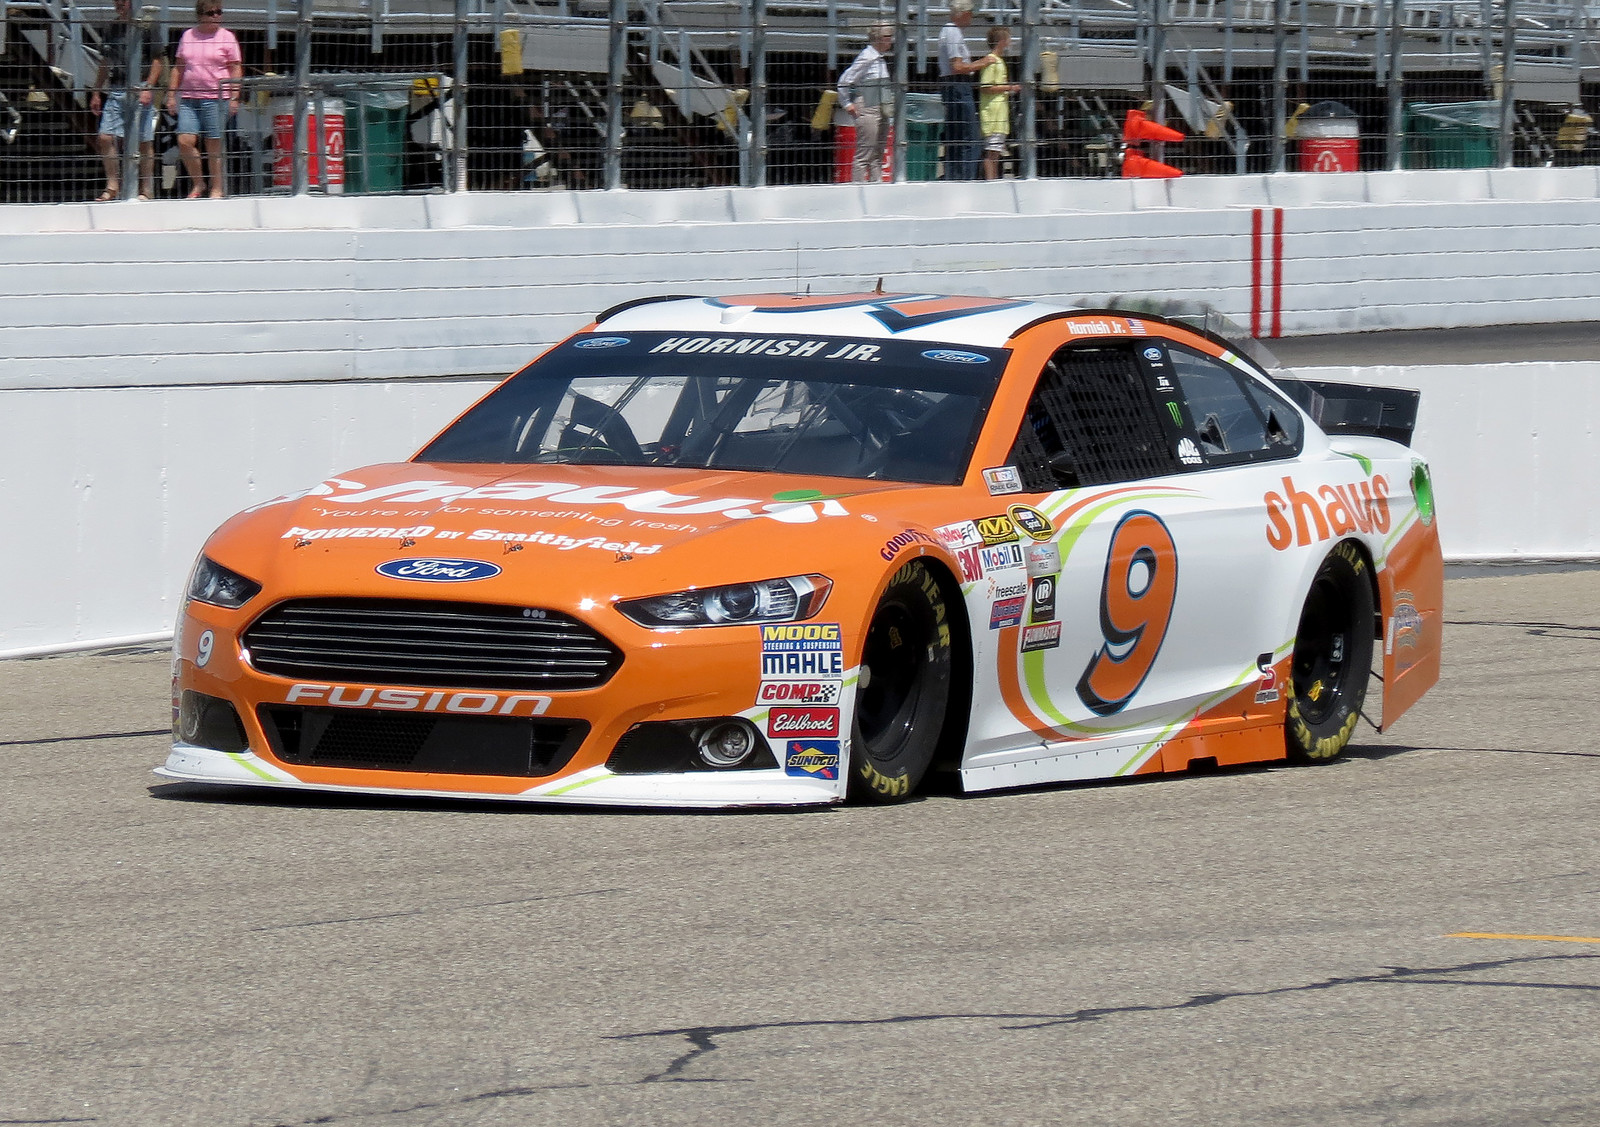 The #9 Shaw's Supermarkets Ford Fusion on track during a practice session at New Hampshire Motor Speedway on July 17th, 2015.